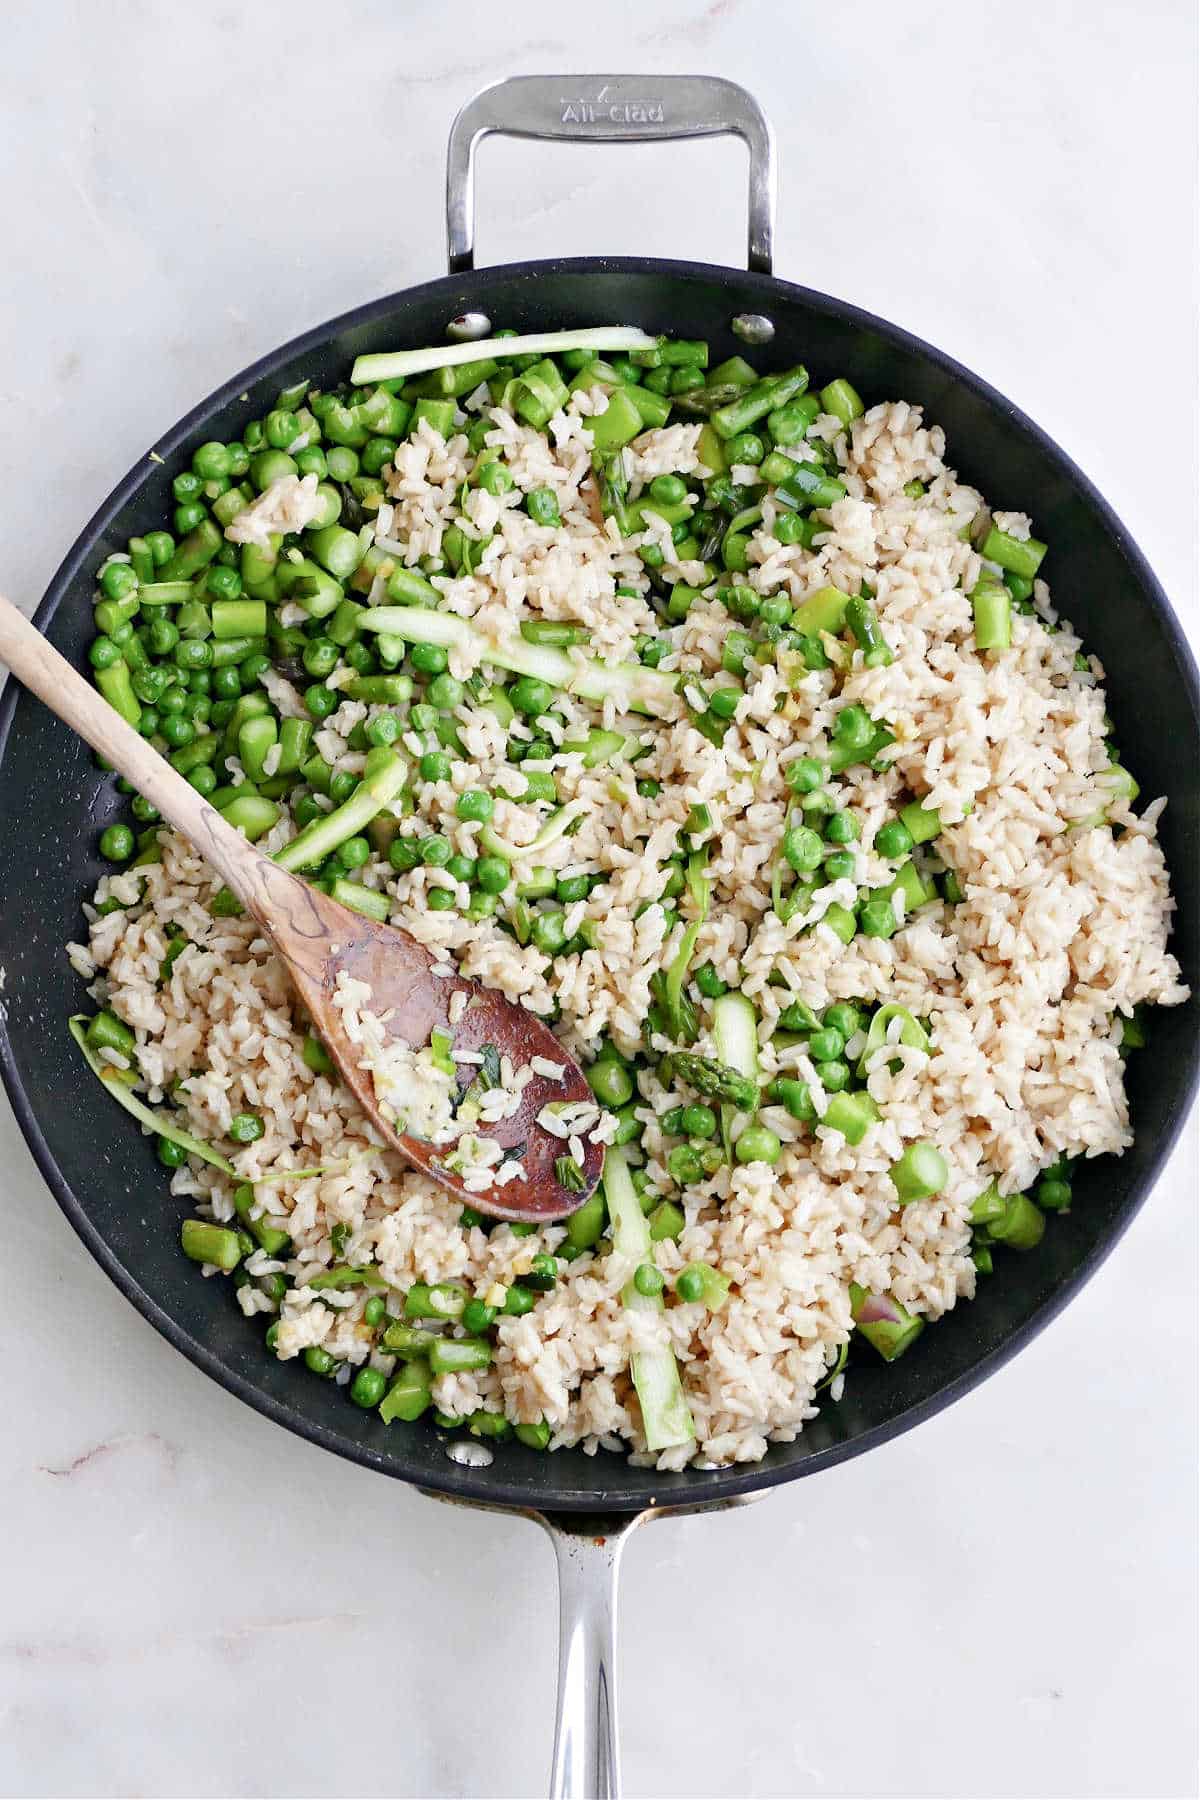 asparagus, peas, green onions, and brown rice cooking in a nonstick skillet